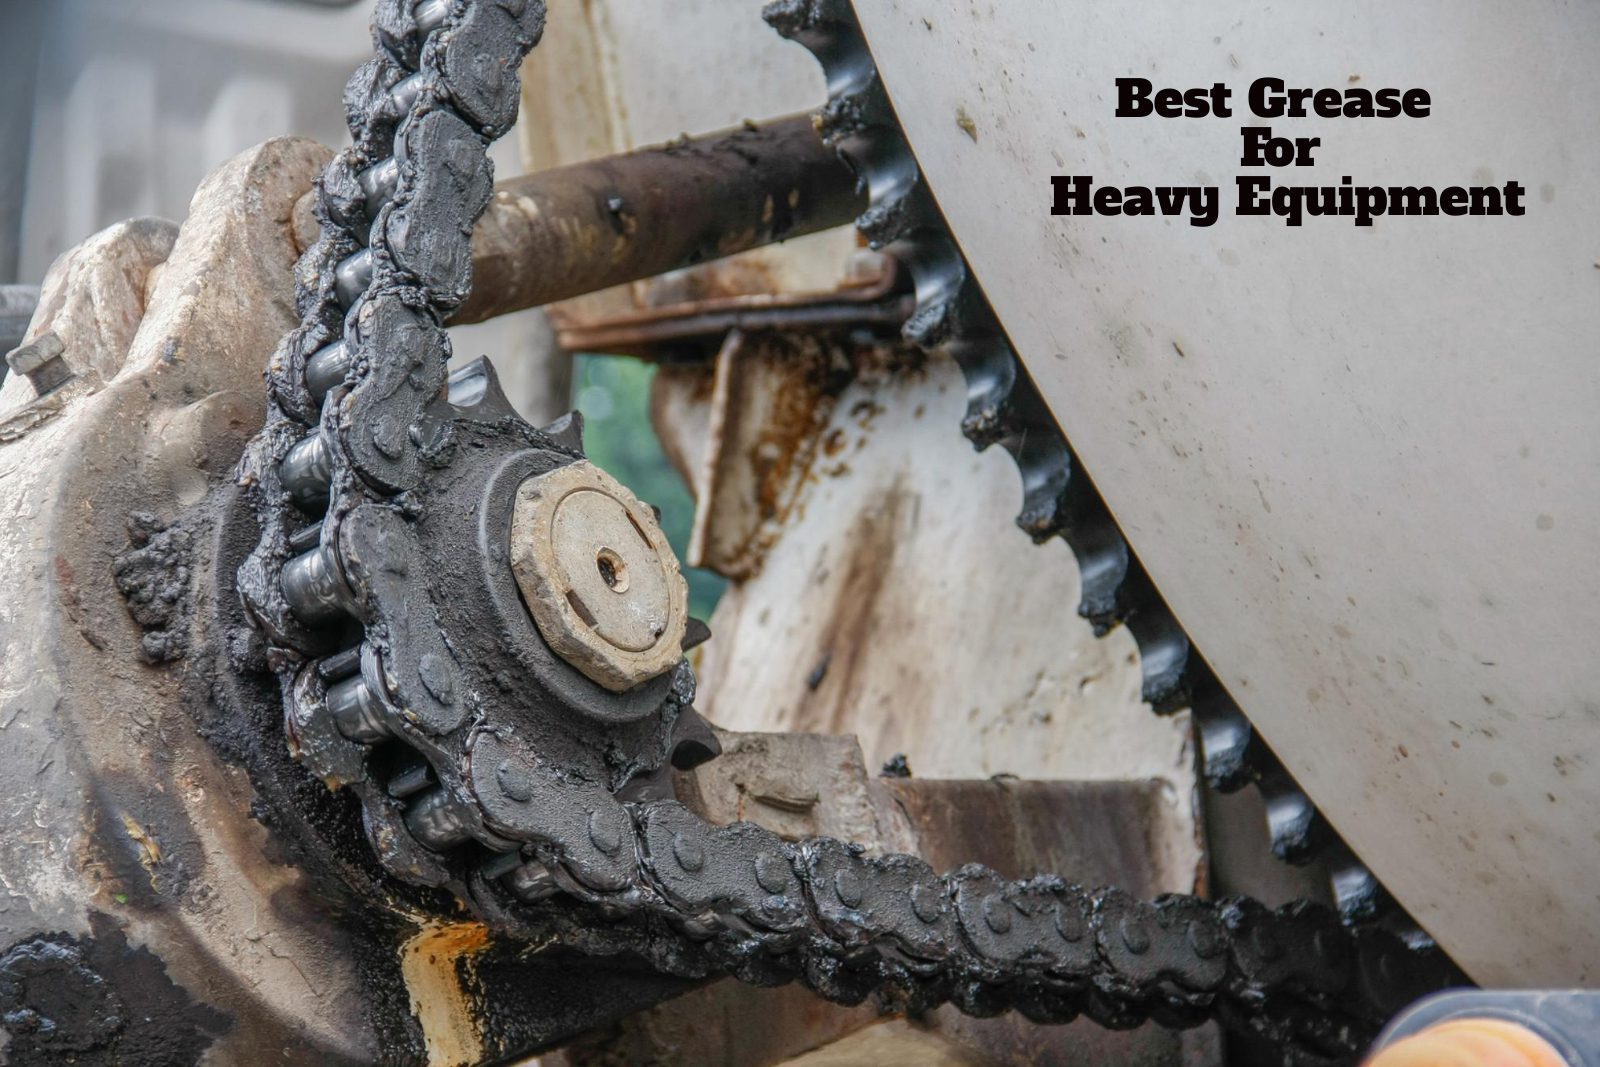 Best Grease for Heavy Equipment